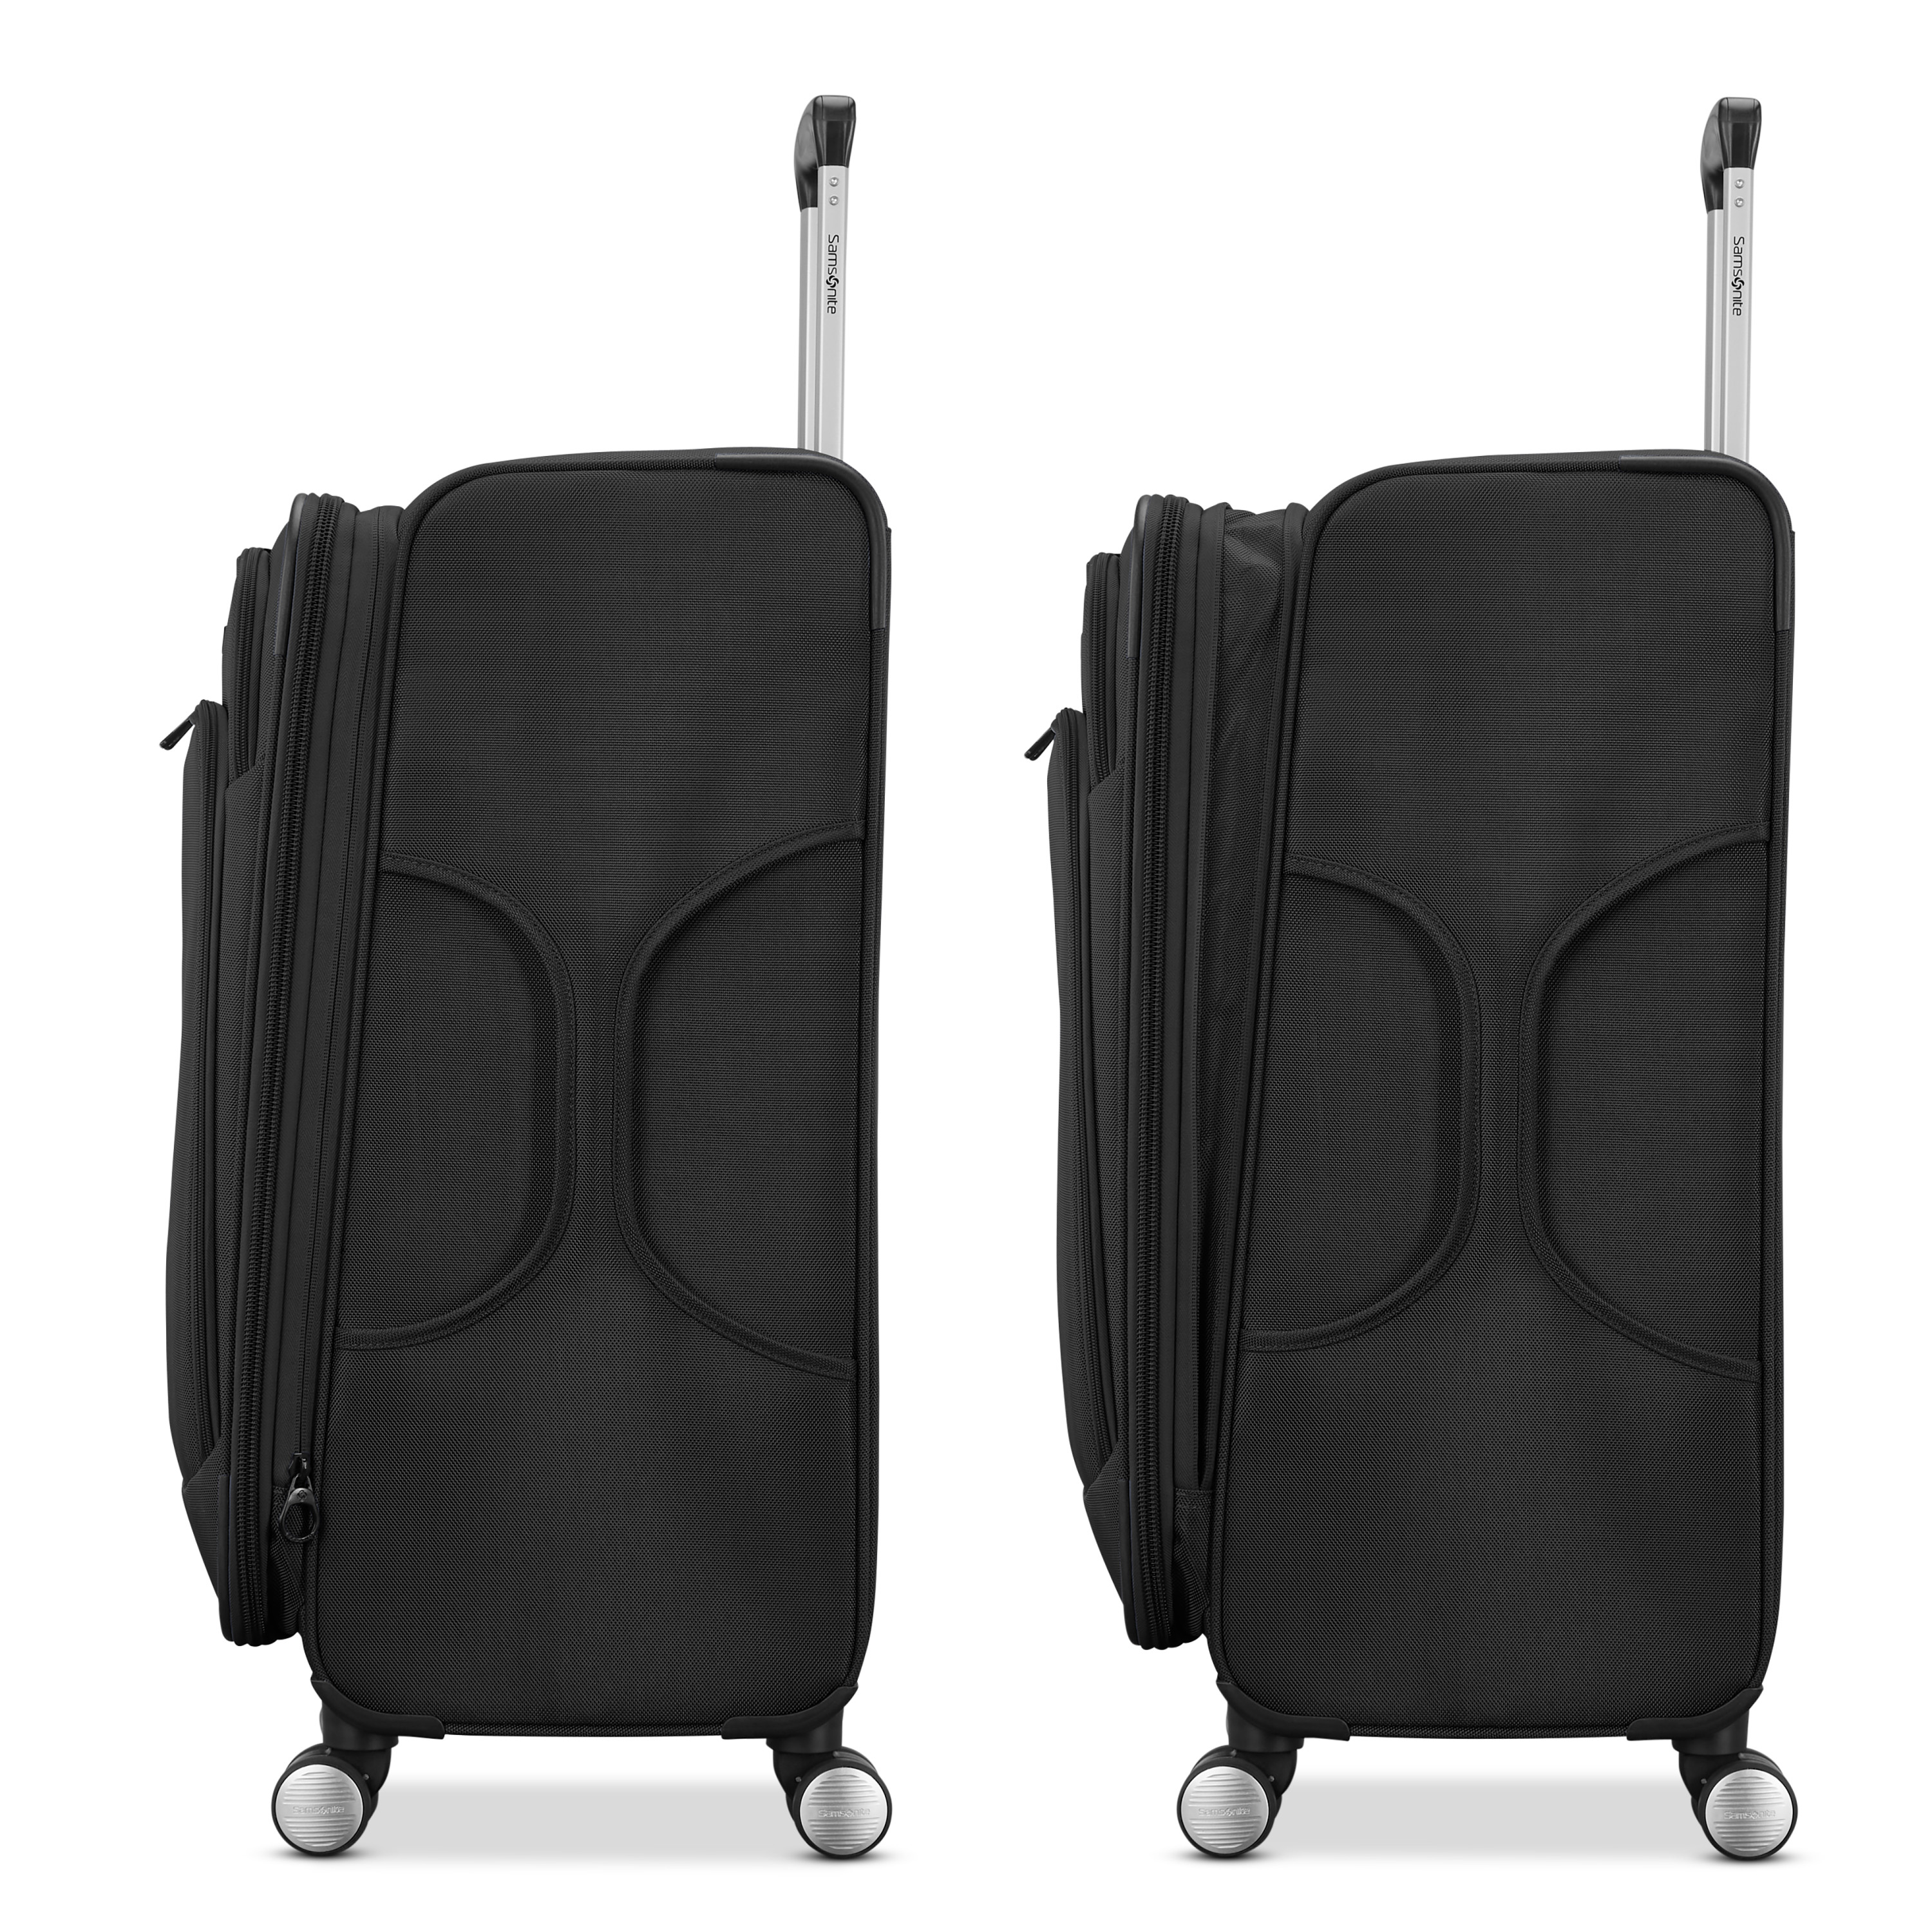 Deluxe Birdy Stackable 2 Piece Carry On Luggage Set